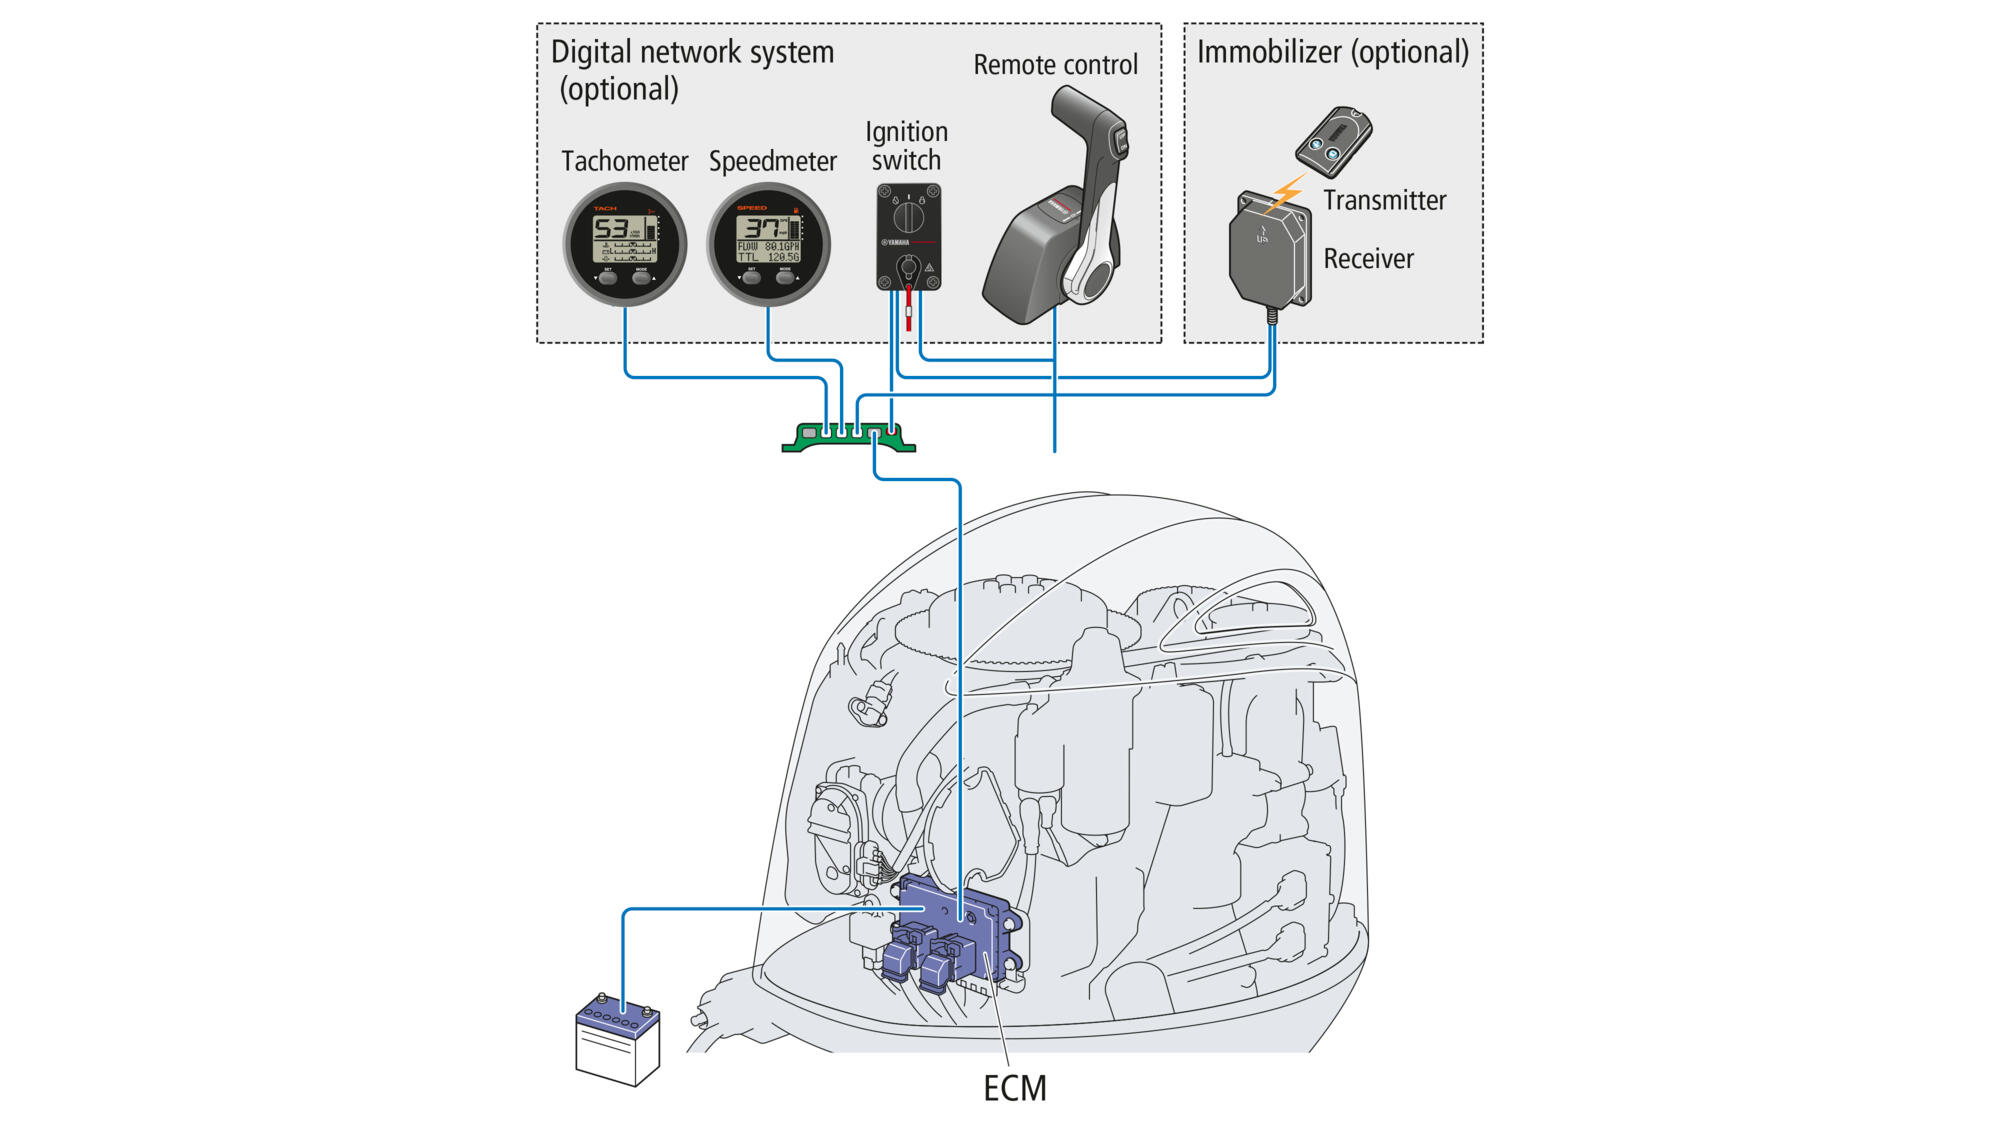 Digital Network System option - clear, accurate information